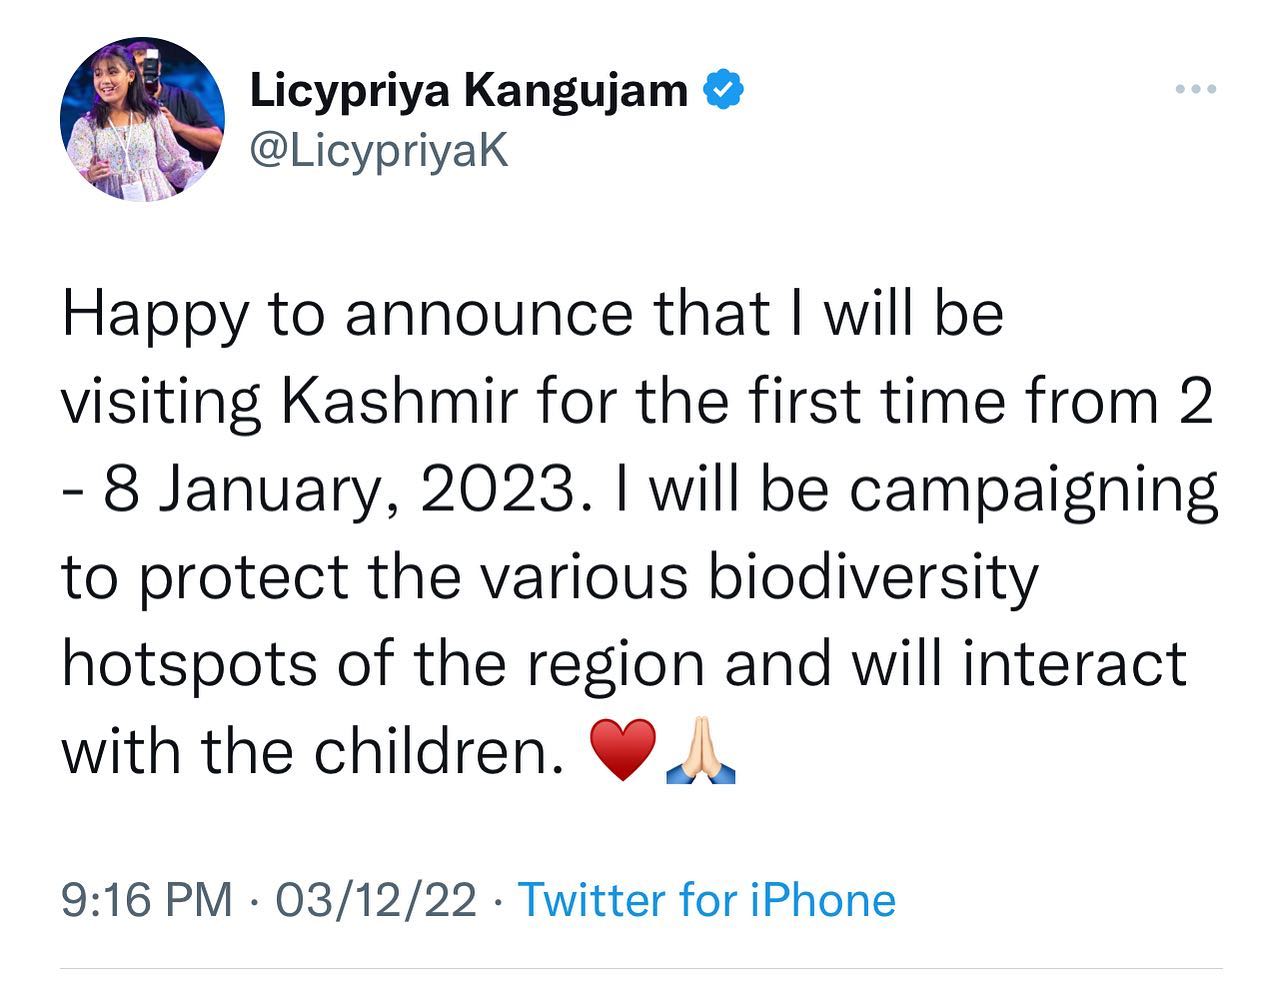 Happy to announce that I will be visiting Kashmir for the first time from 2 - 8 January, 2023. I will be campaigning to protect the various biodiversity hotspots of the region and will interact with the children. ♥️🙏🏻